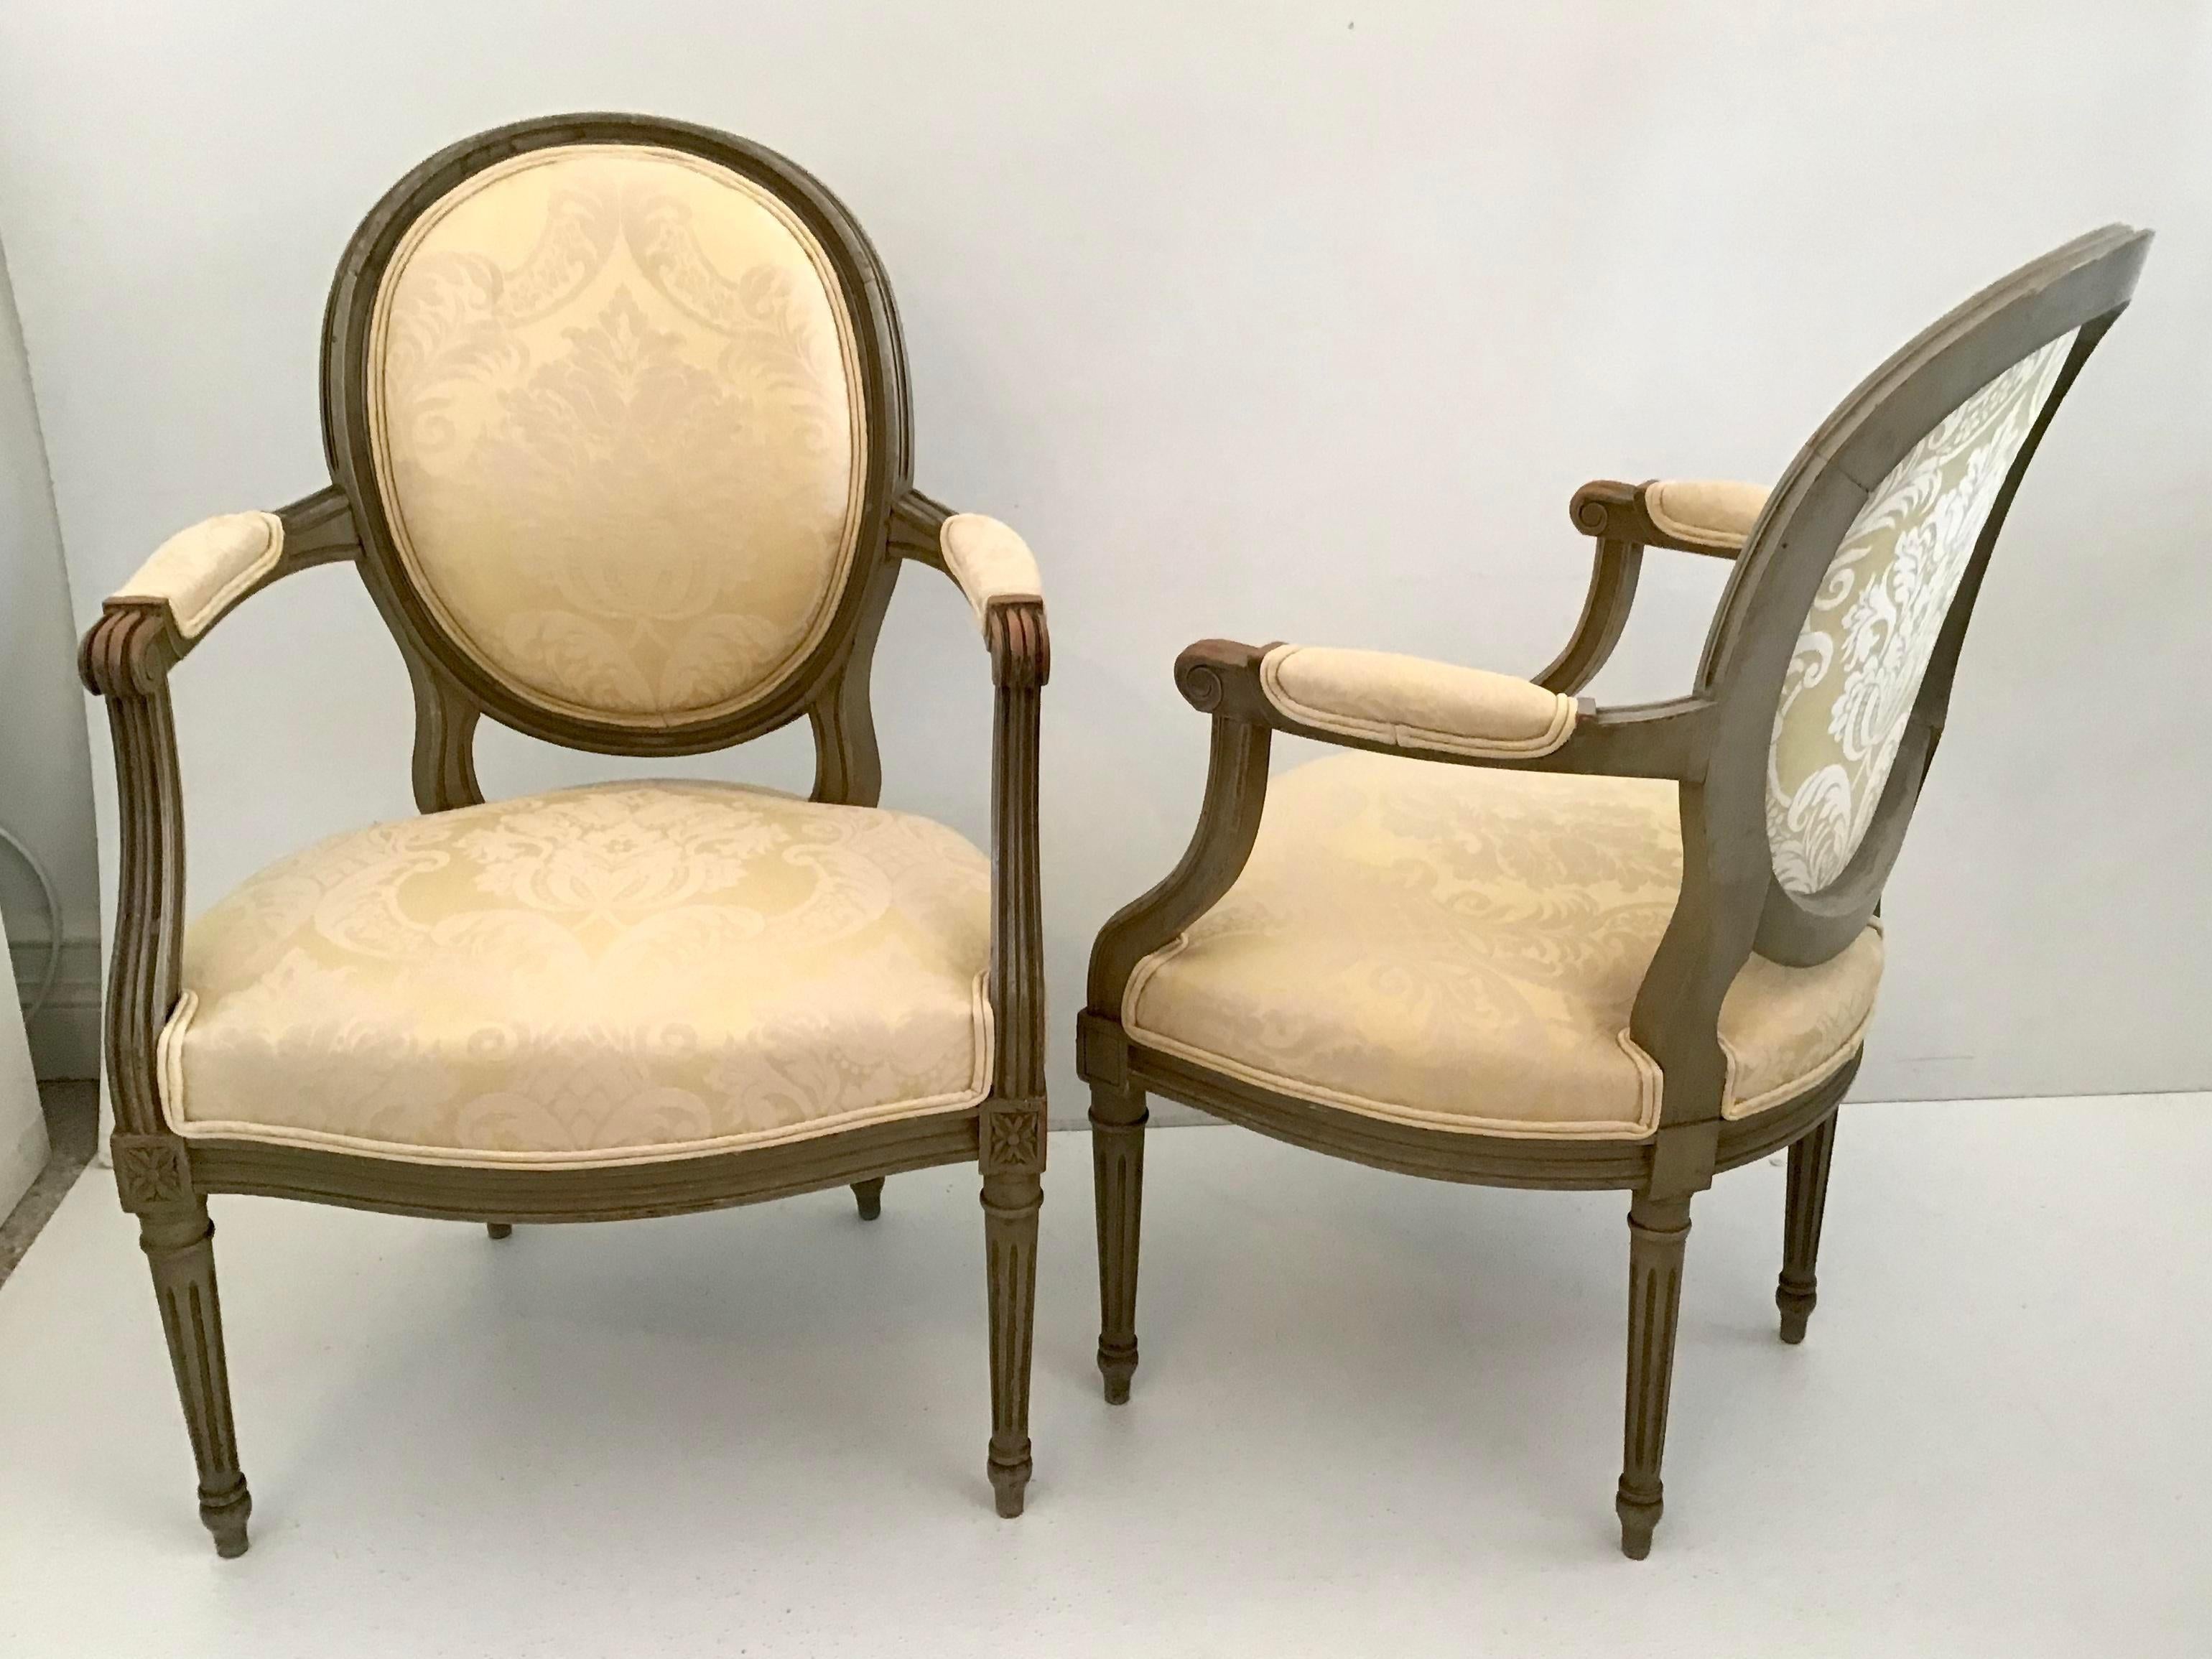 French Bronze Louis XVI Fauteuils in New Yellow Damask Upholstery, a Pair In Good Condition For Sale In Los Angeles, CA